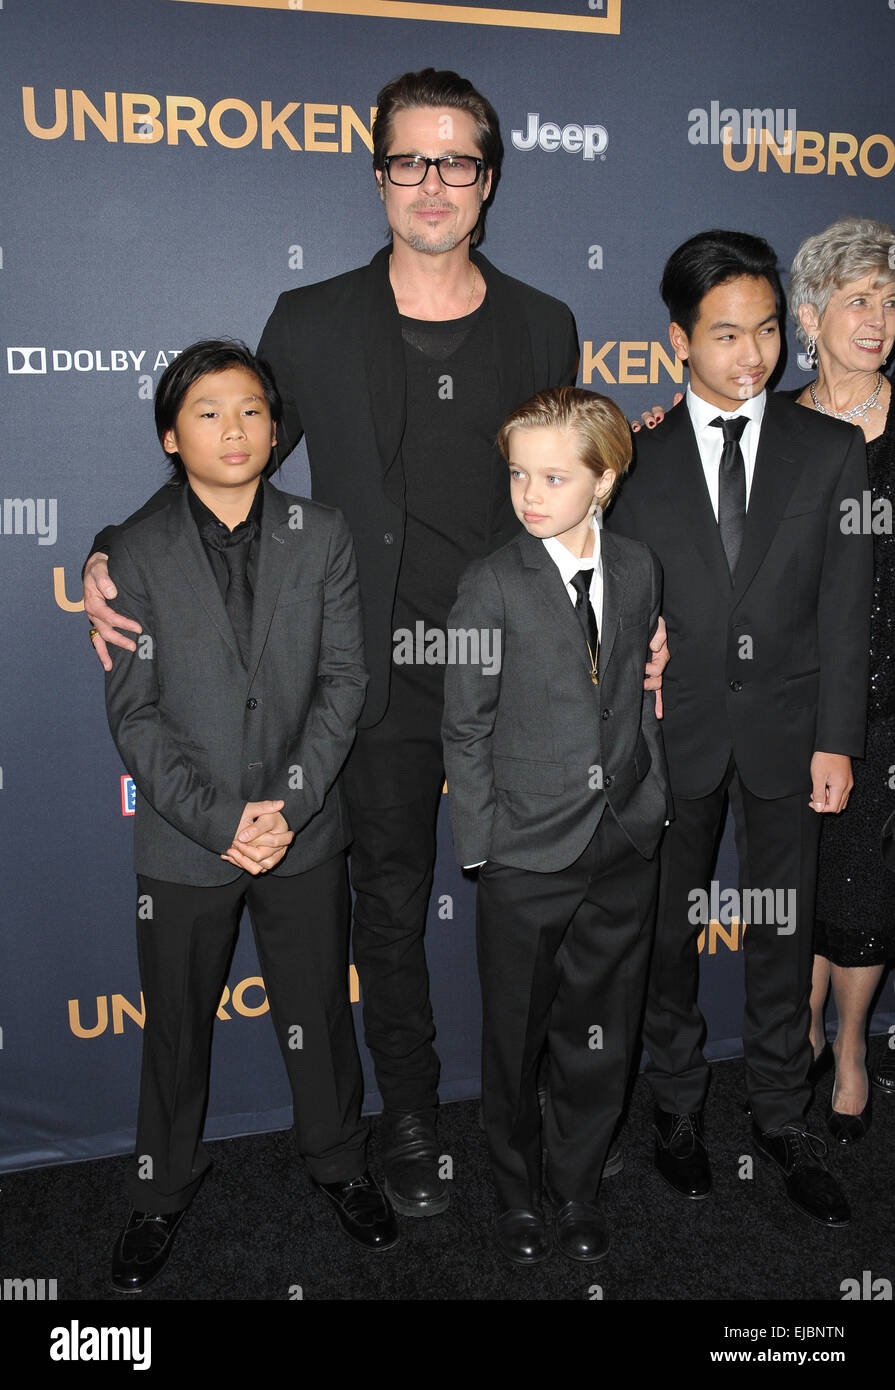 LOS ANGELES, CA - DECEMBER 15, 2014: Brad Pitt & children Pax Jolie-Pitt, Shiloh Jolie-Pitt & Maddox Jolie-Pitt at the Los Angeles premiere of 'Unbroken' at the Dolby Theatre, Hollywood. Stock Photo